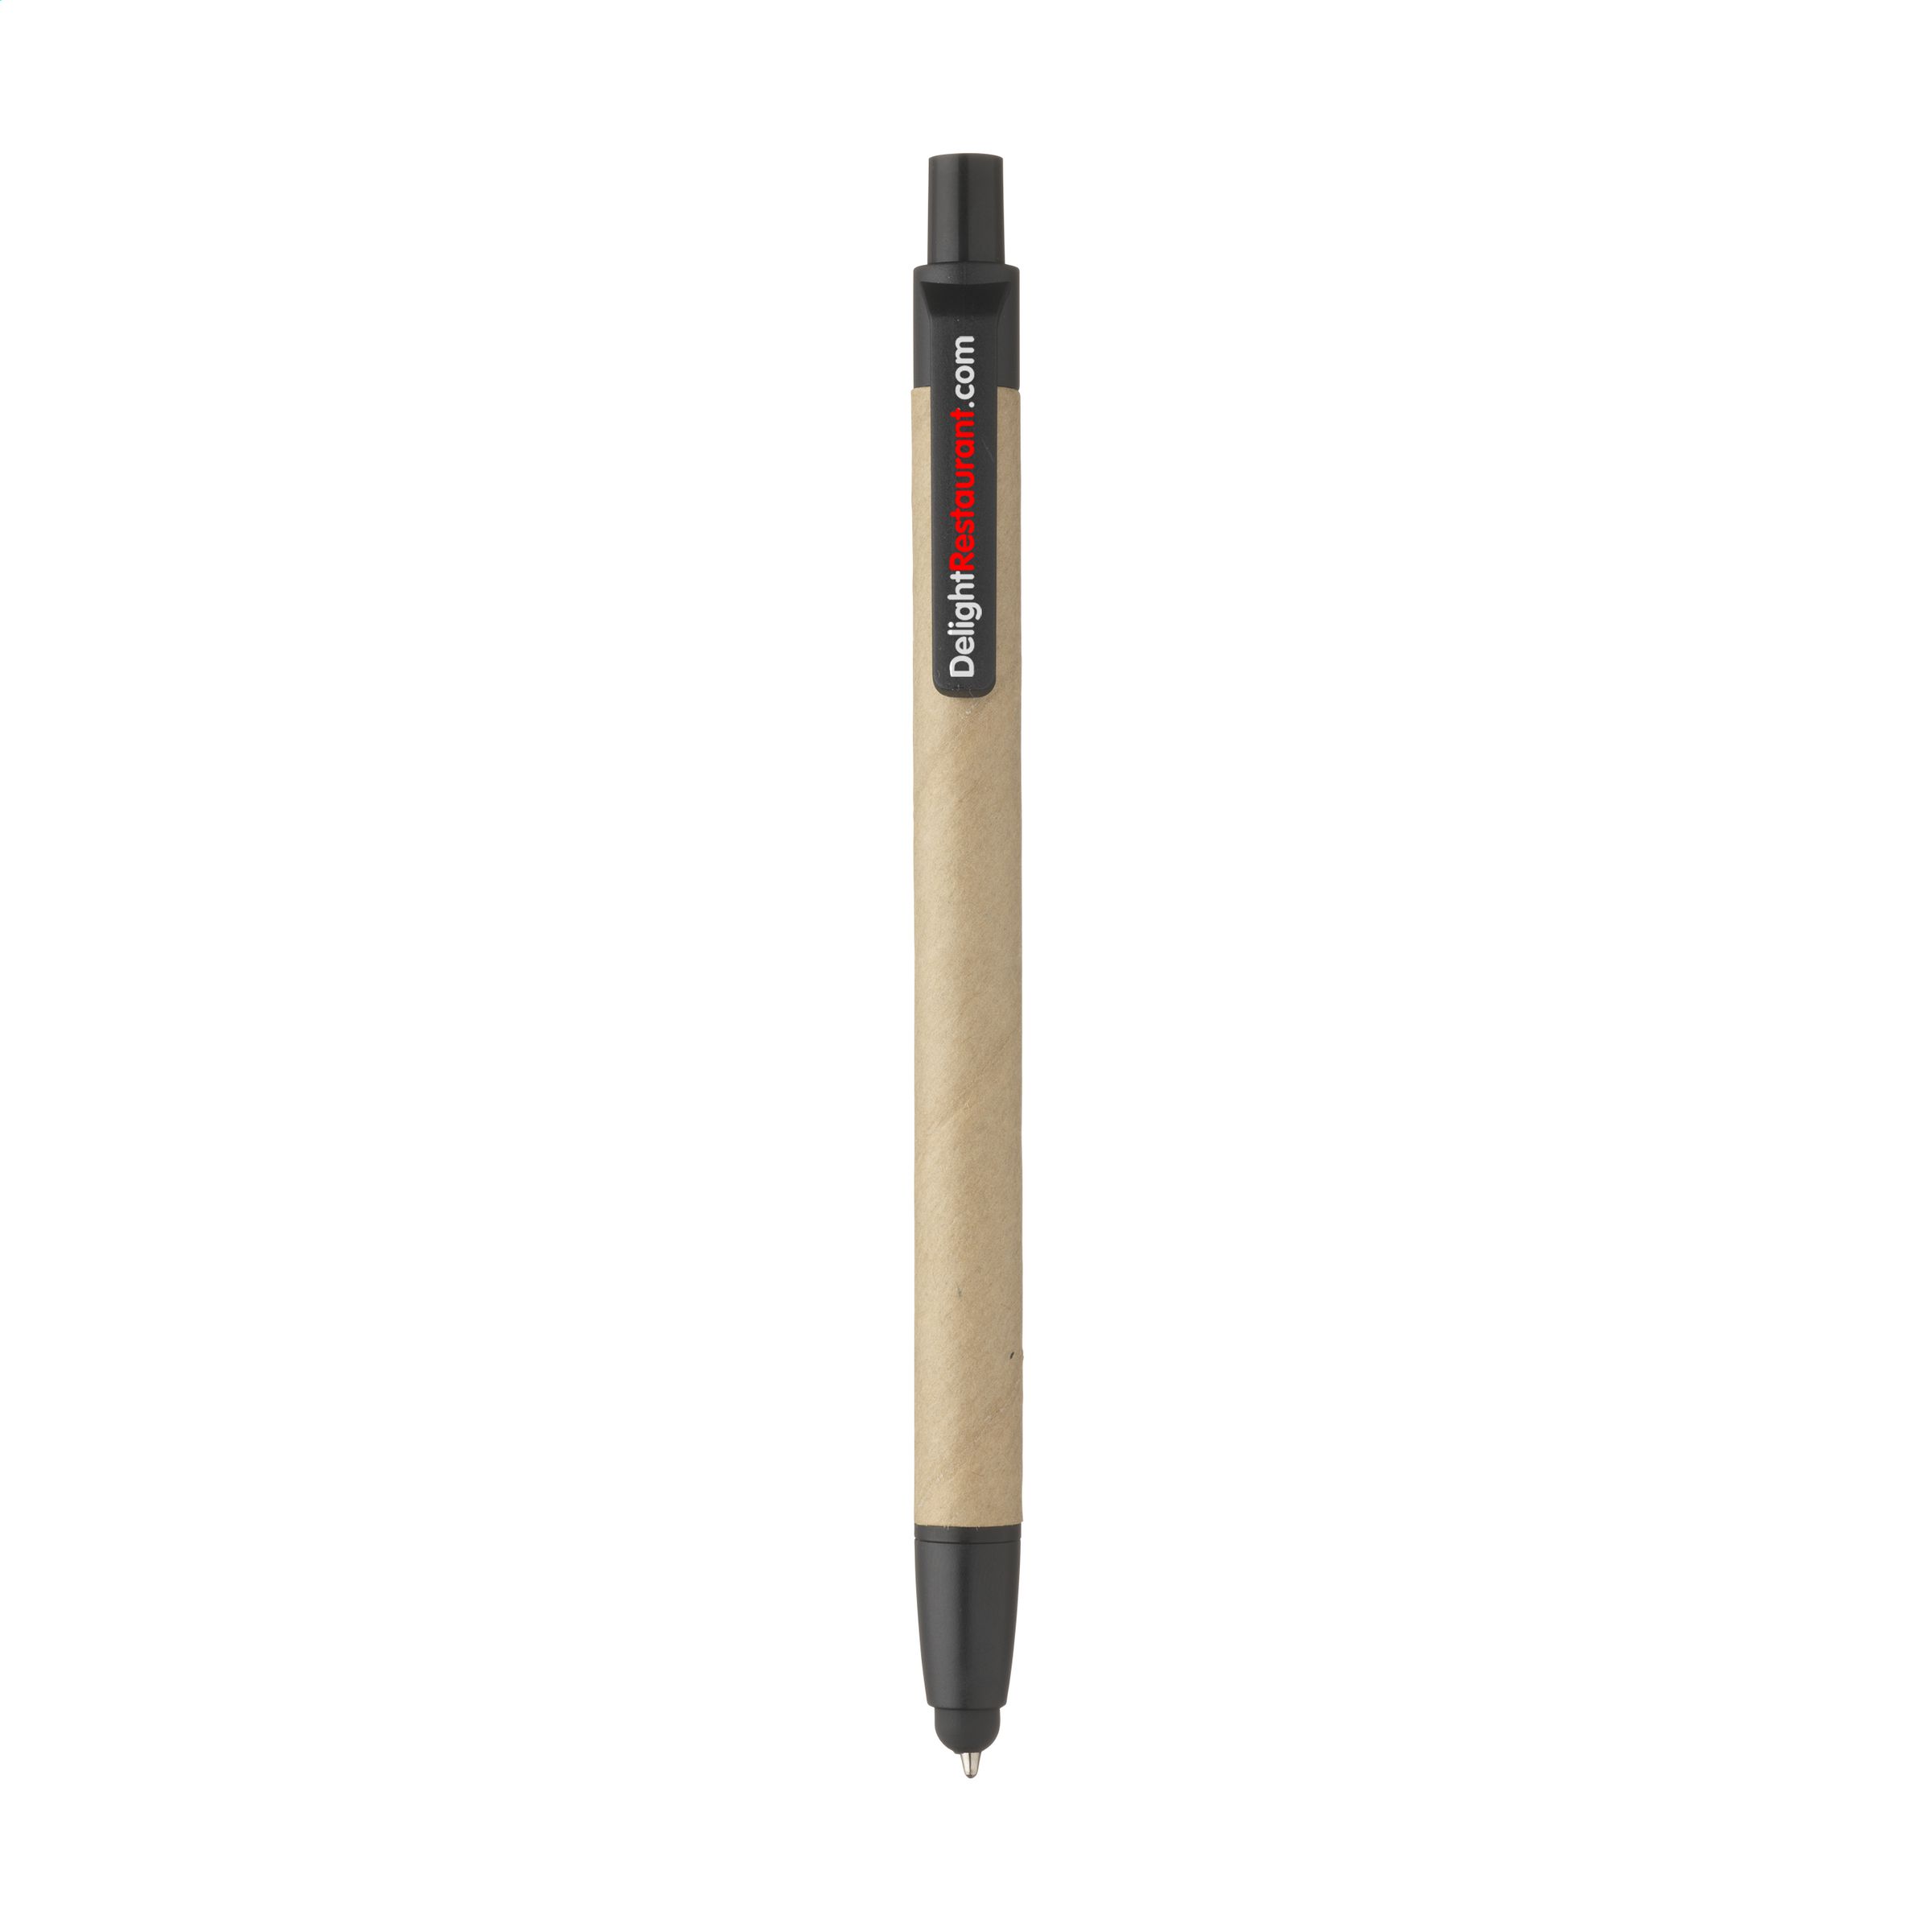 A ballpoint pen made from recycled cardboard that also includes a touchscreen pointer - Bowdon